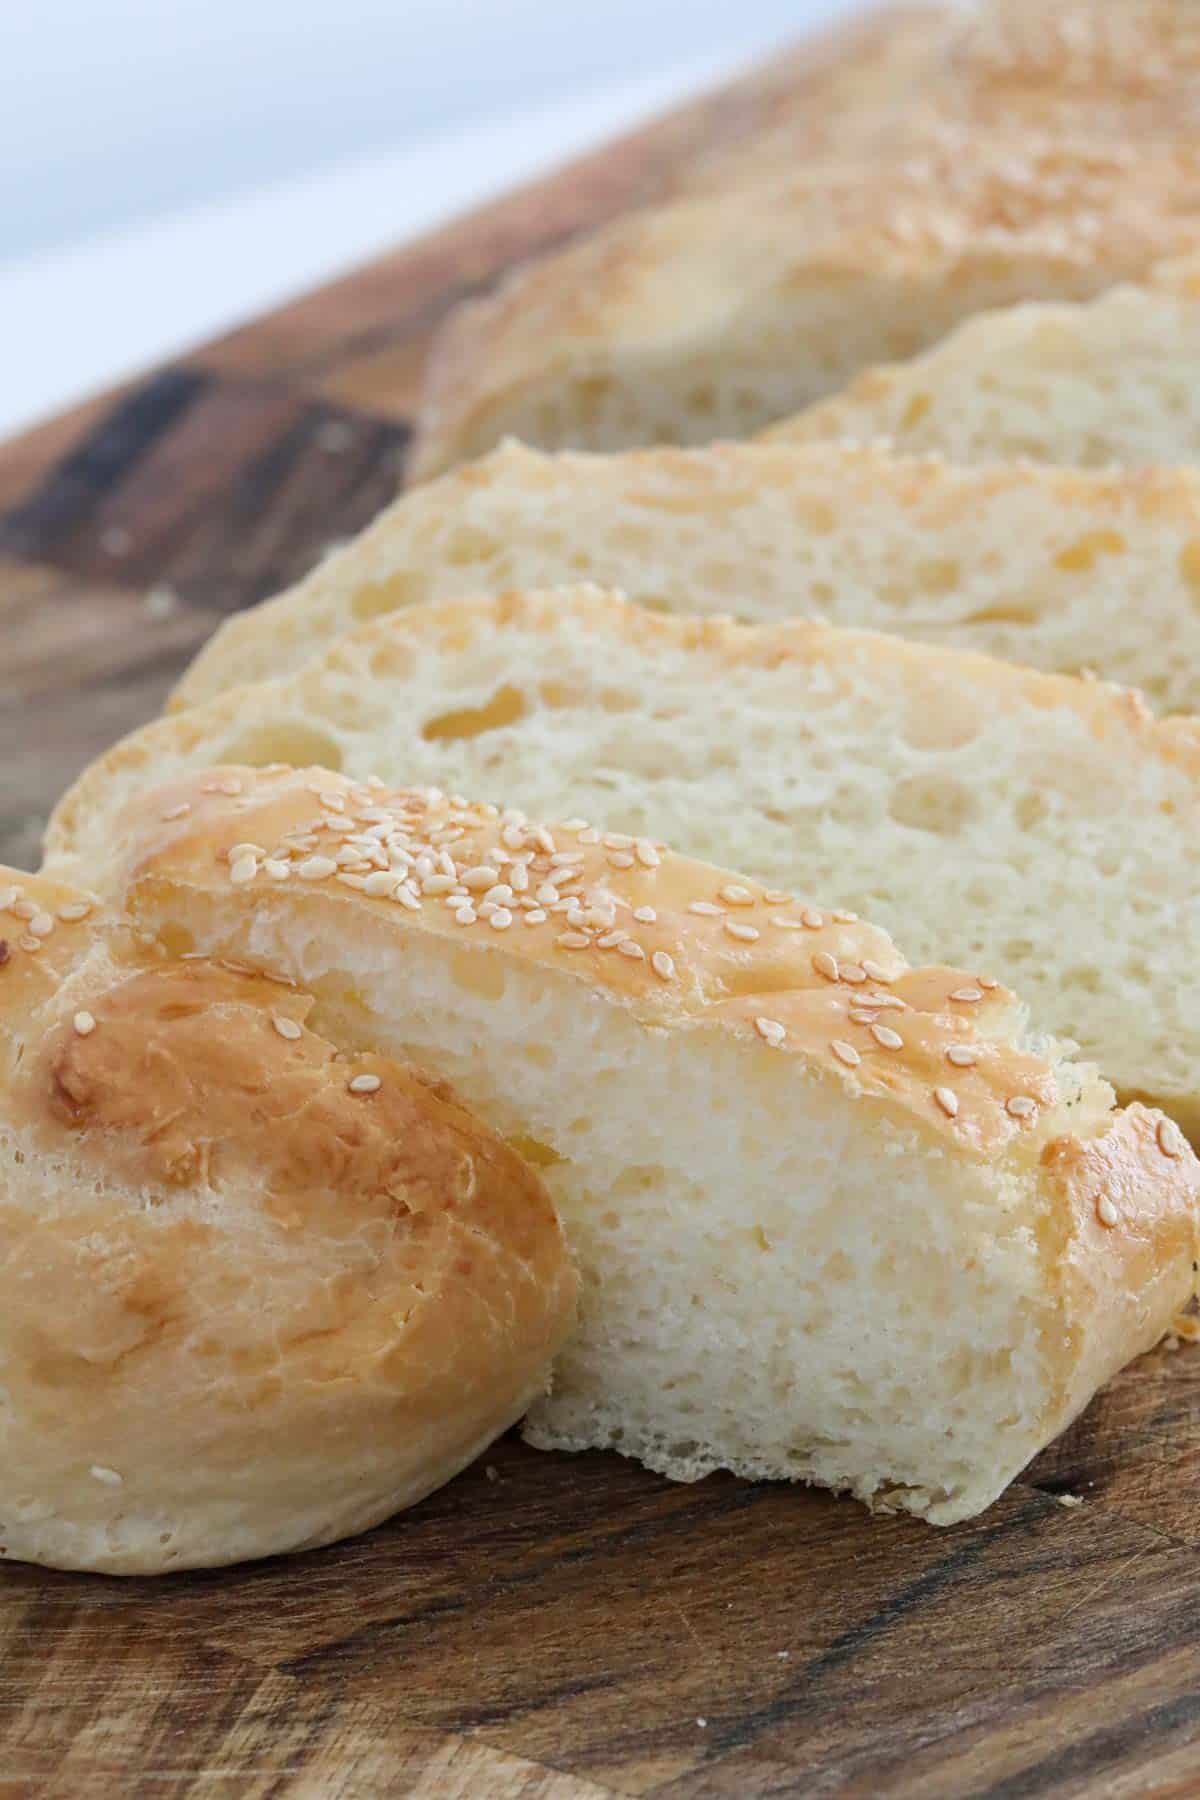 Fluffy, airy turkish bread cut into slices.